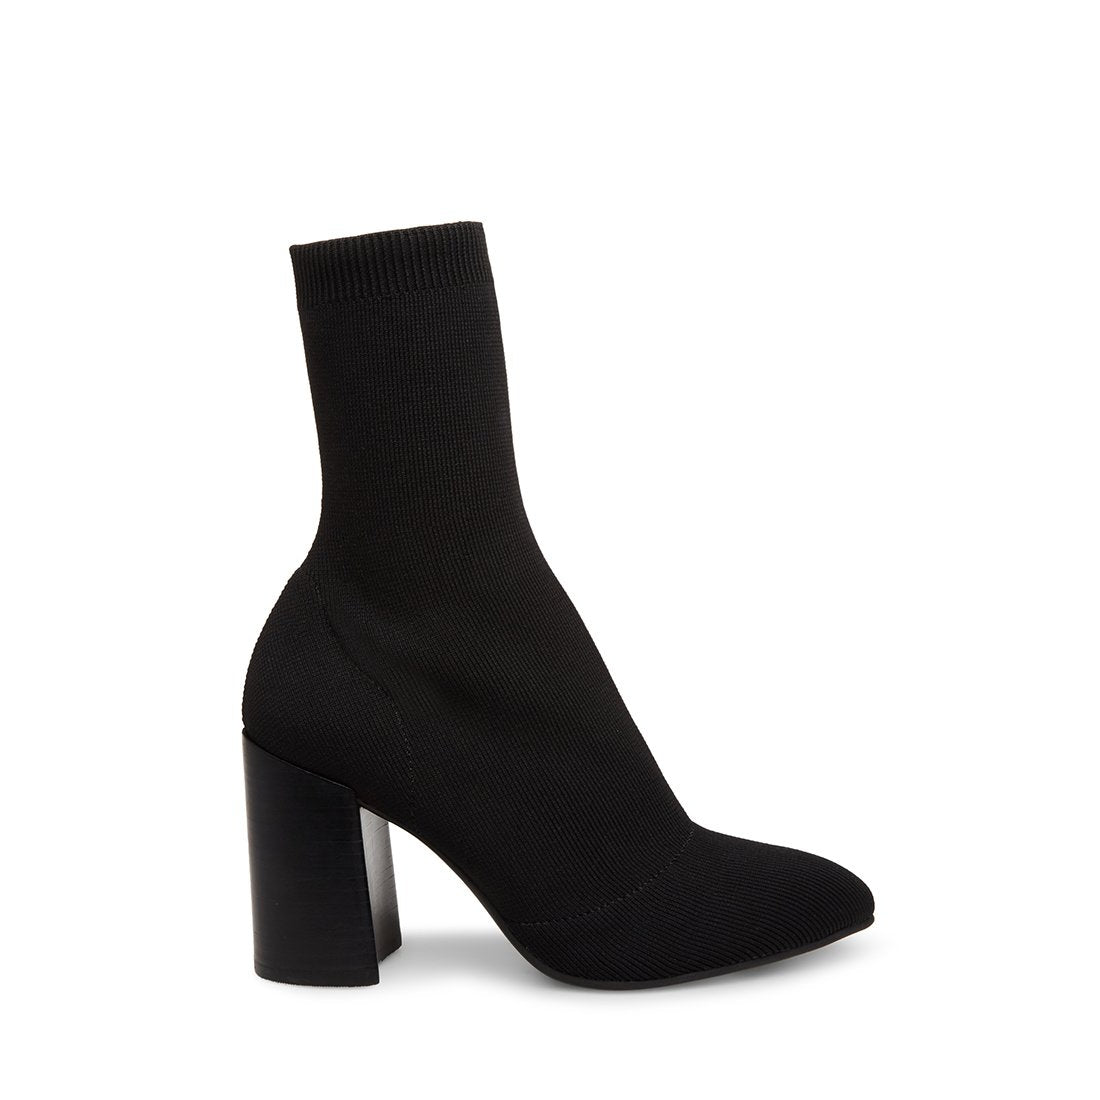 steve madden black booties with buckles